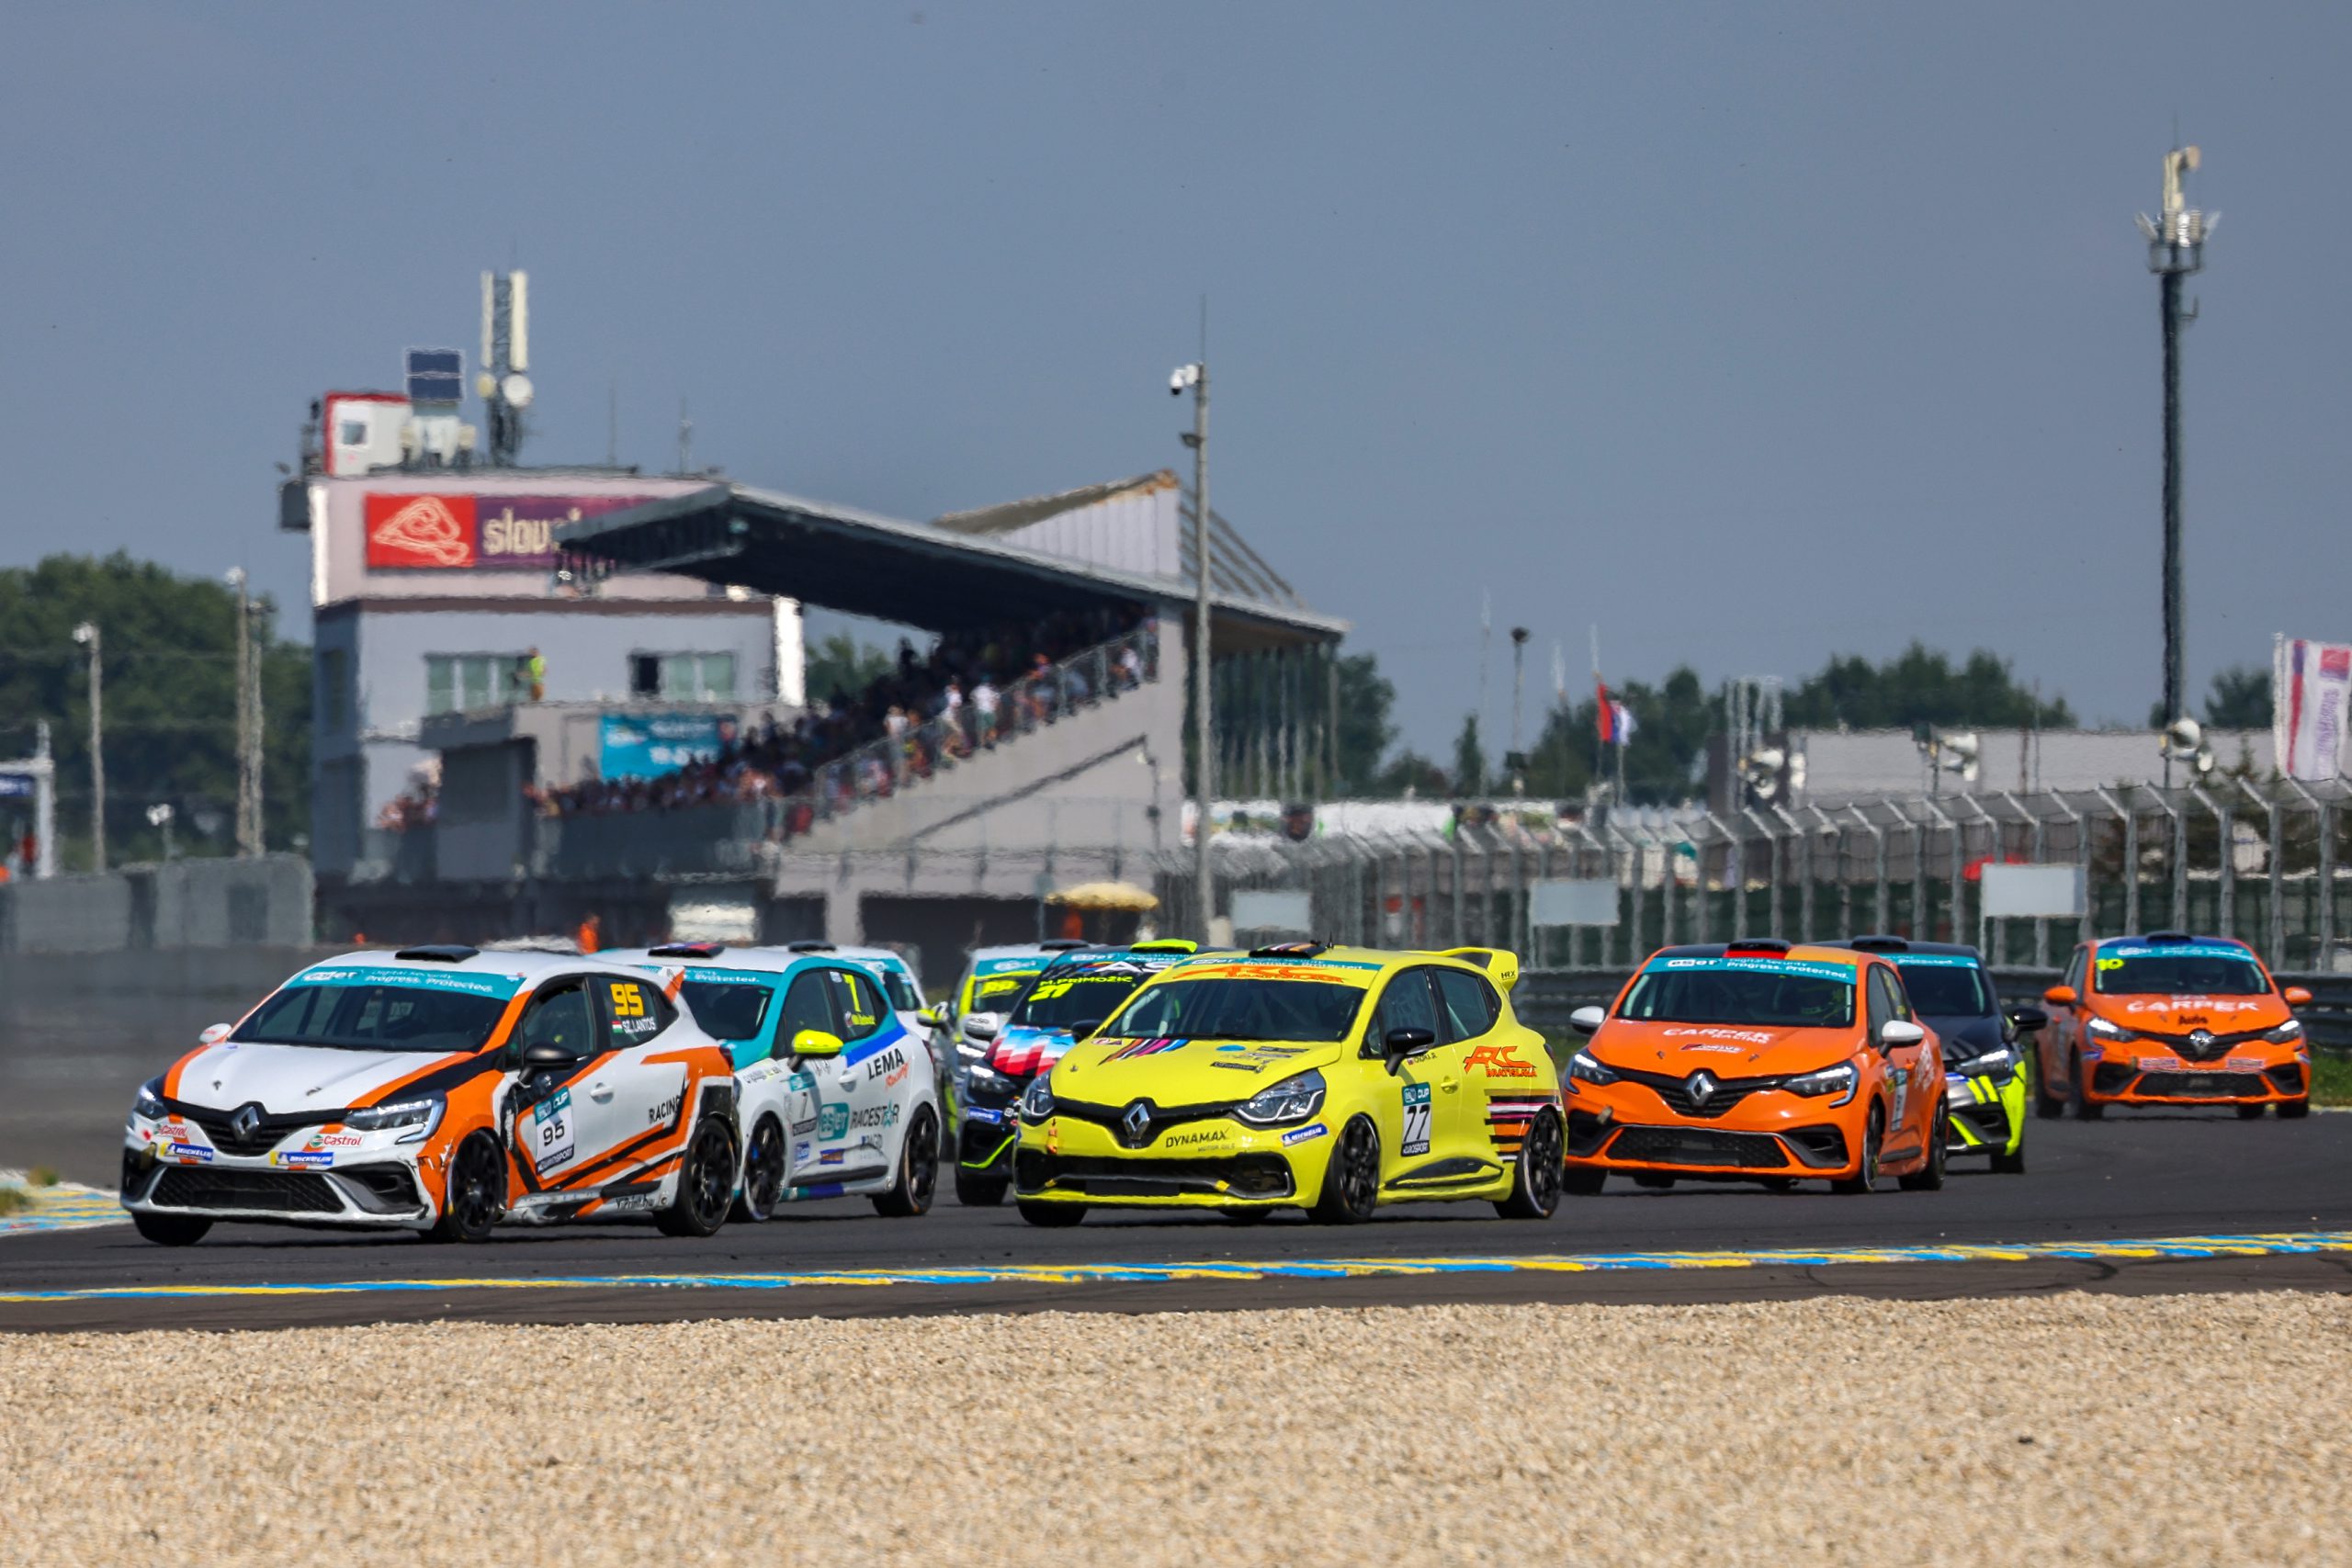 Reconstruction delay at Hungaroring, replacement race to be held at Slovakia Ring